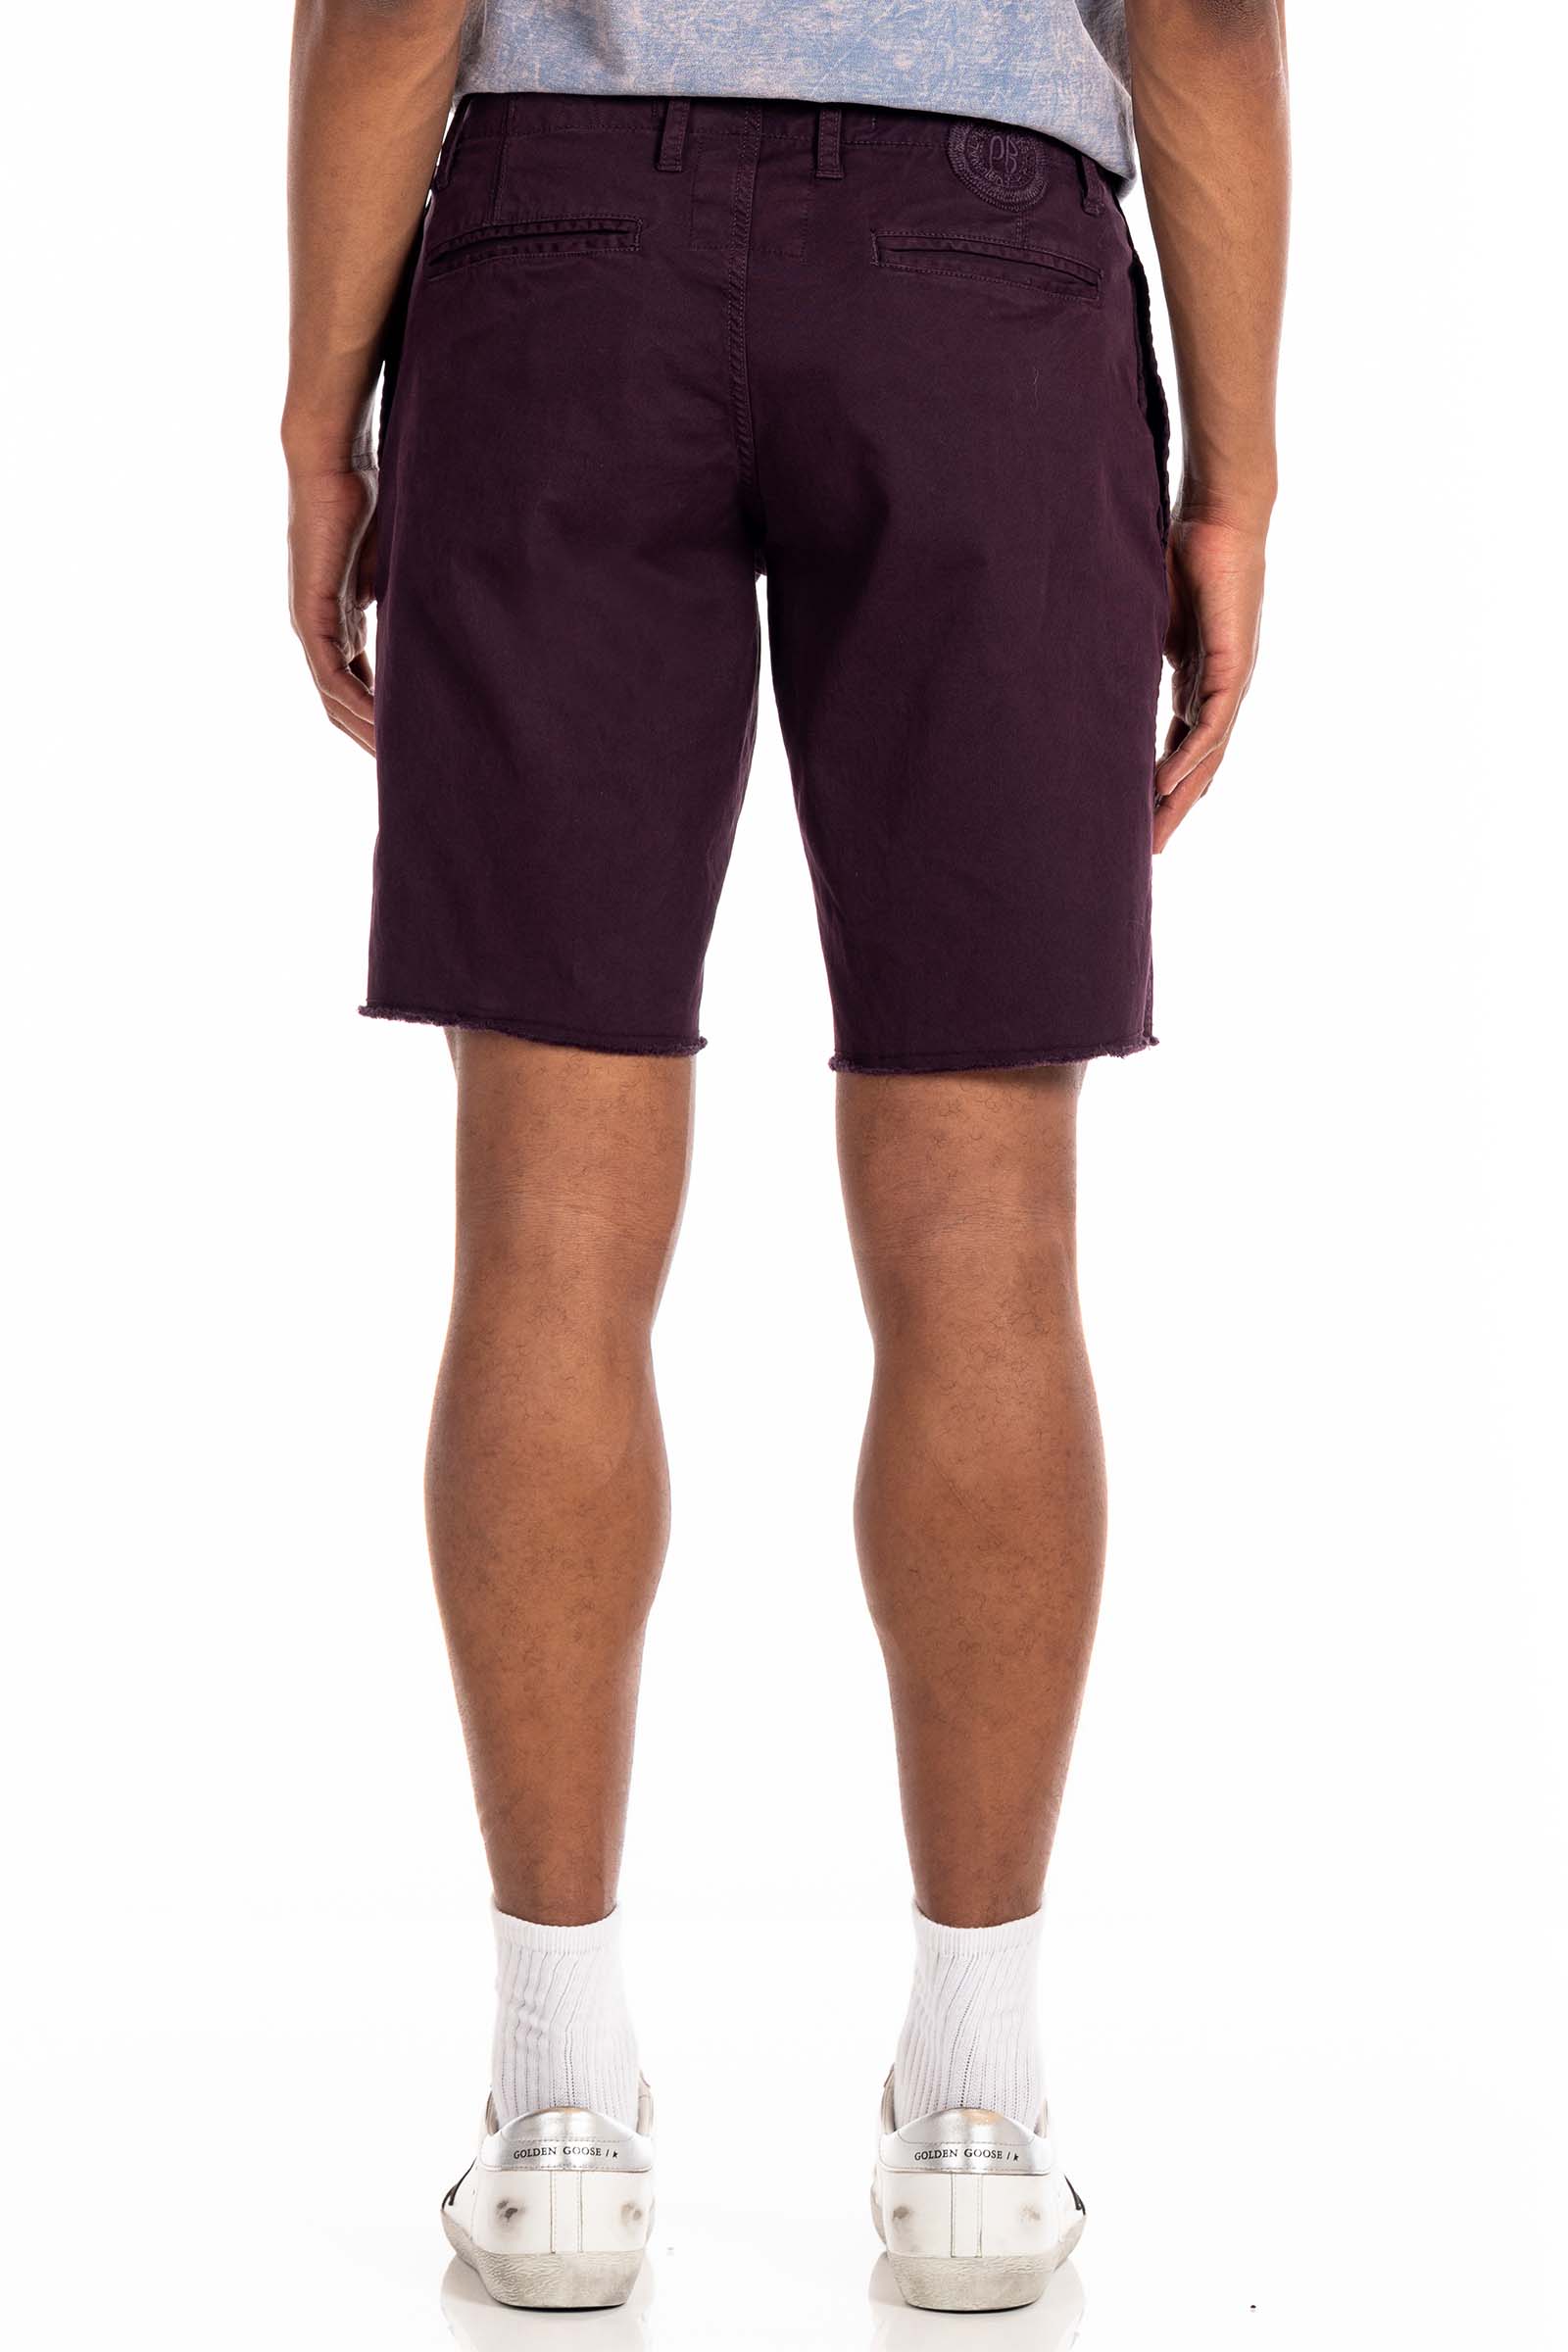 Original Paperbacks Rockland Chino Short in Plum on Model Cropped Back View